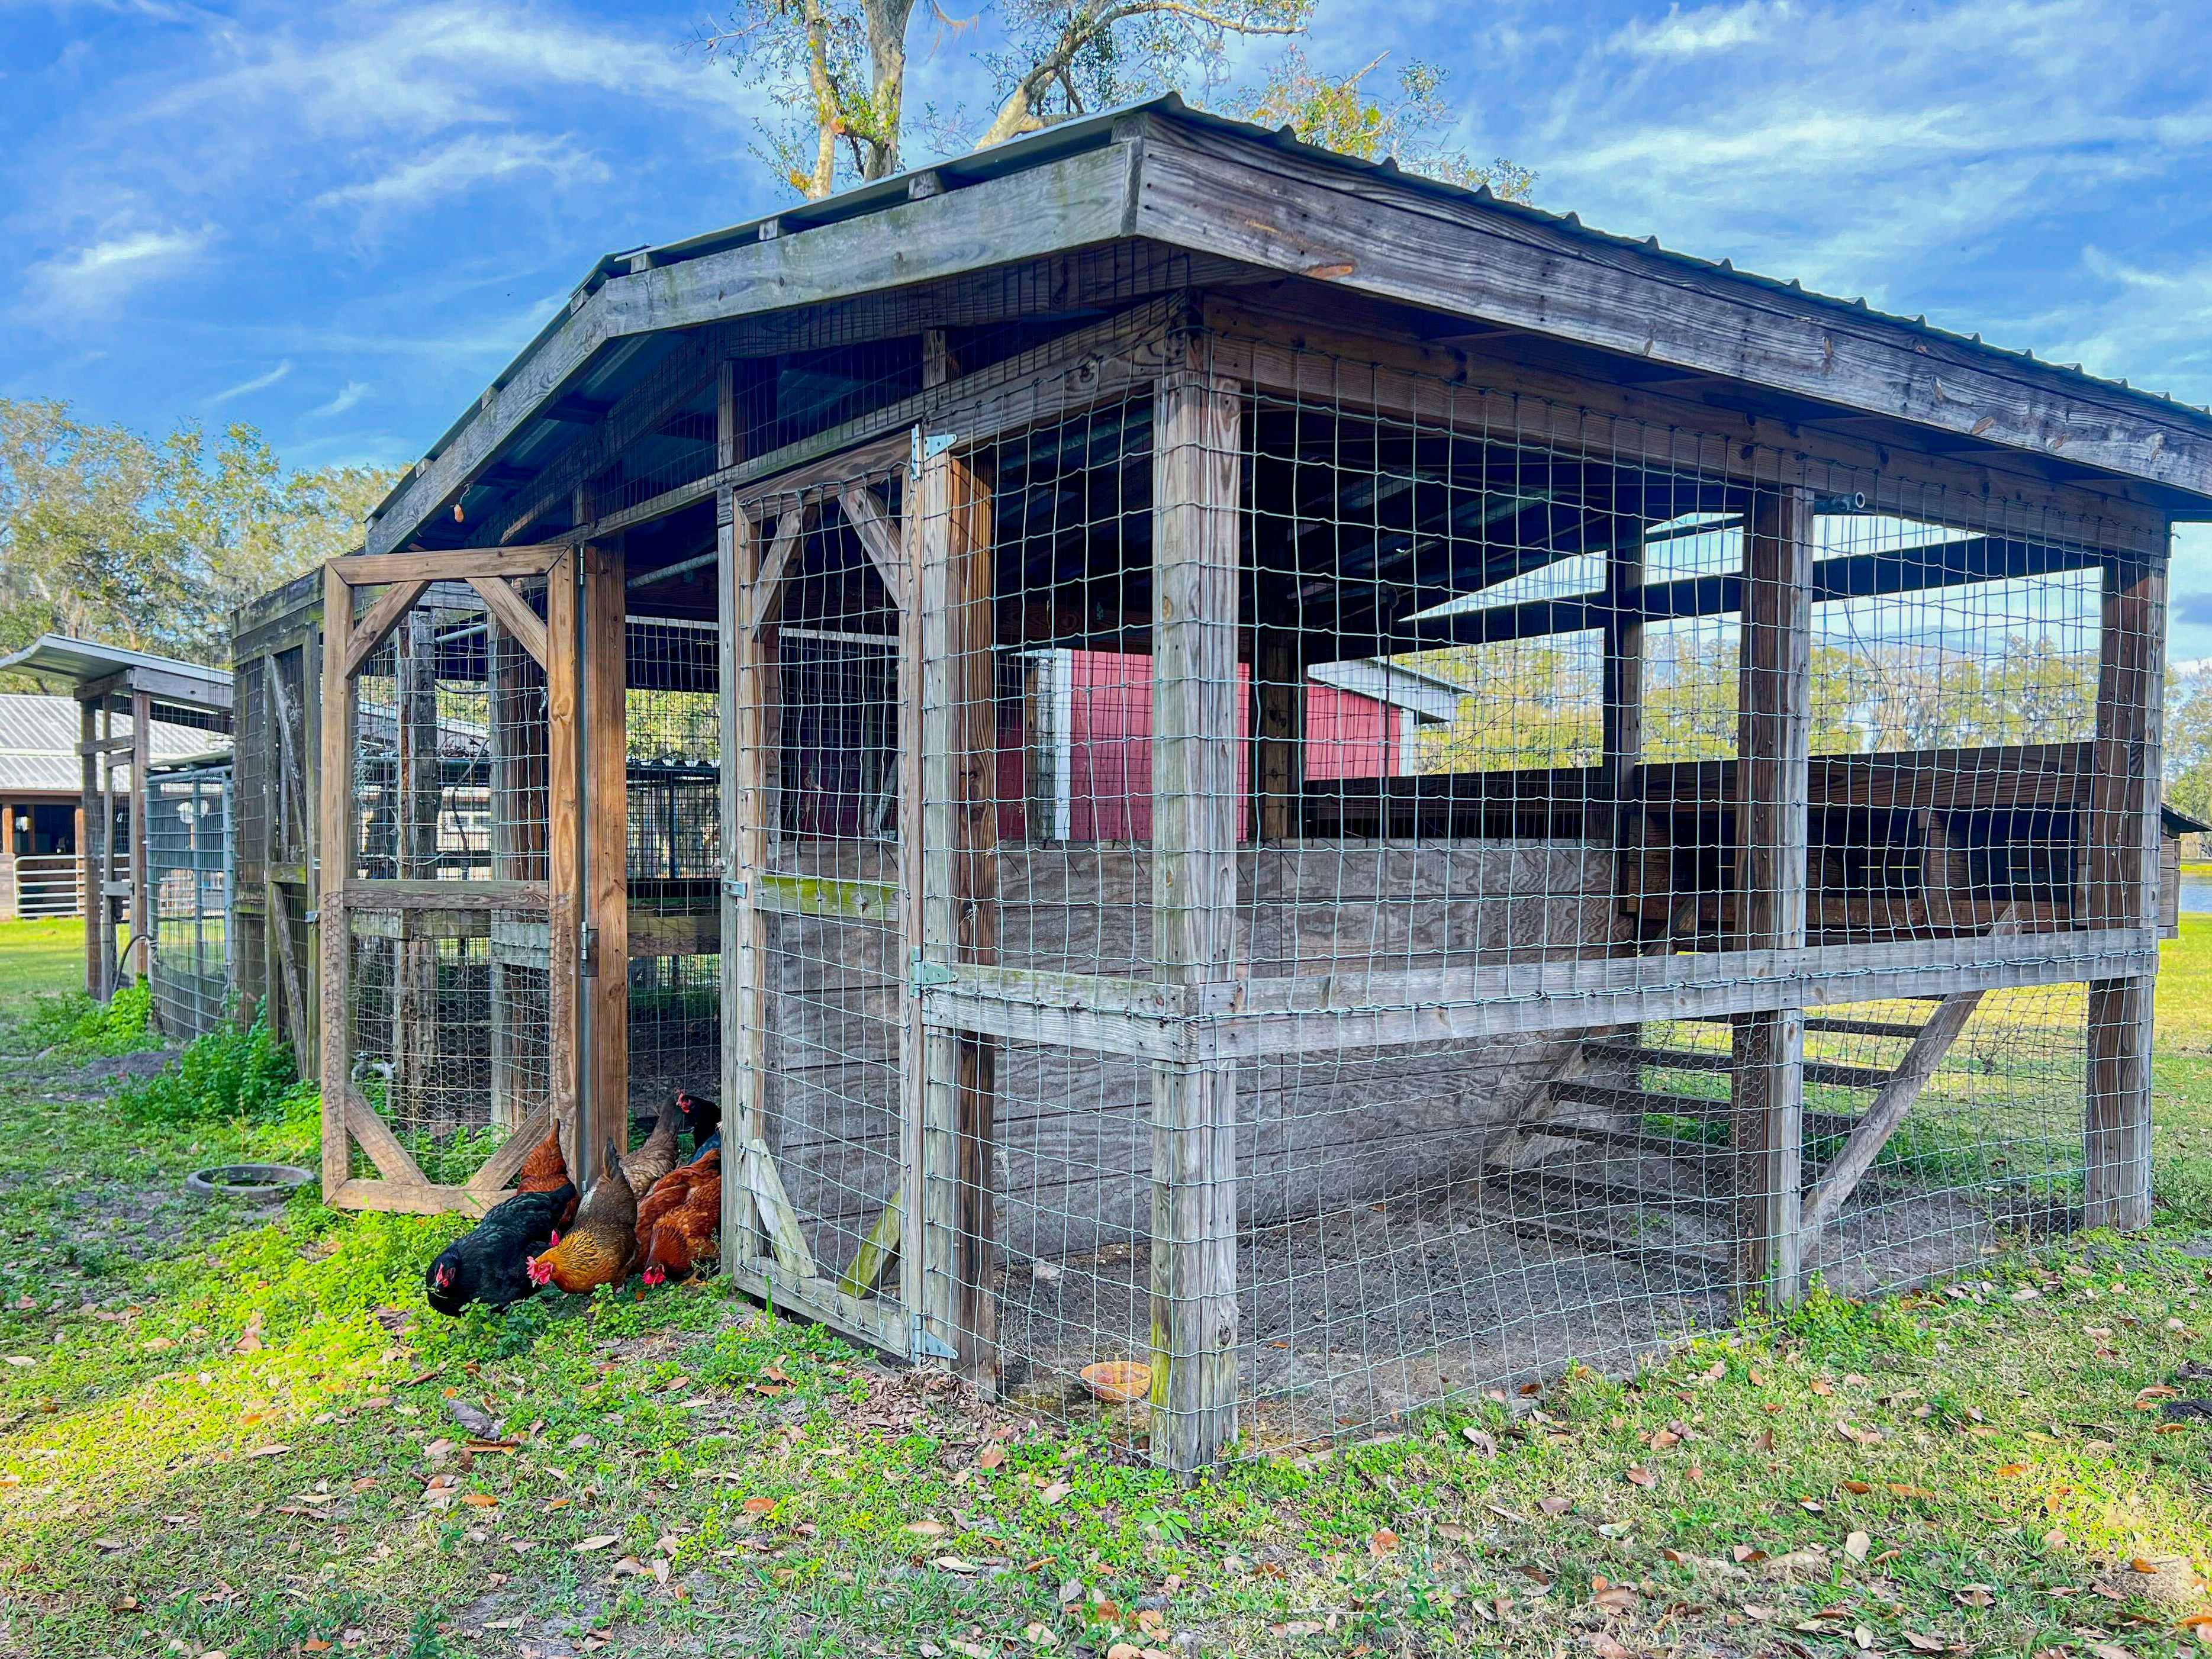 A large chicken coop with some chickens pecking in the grass